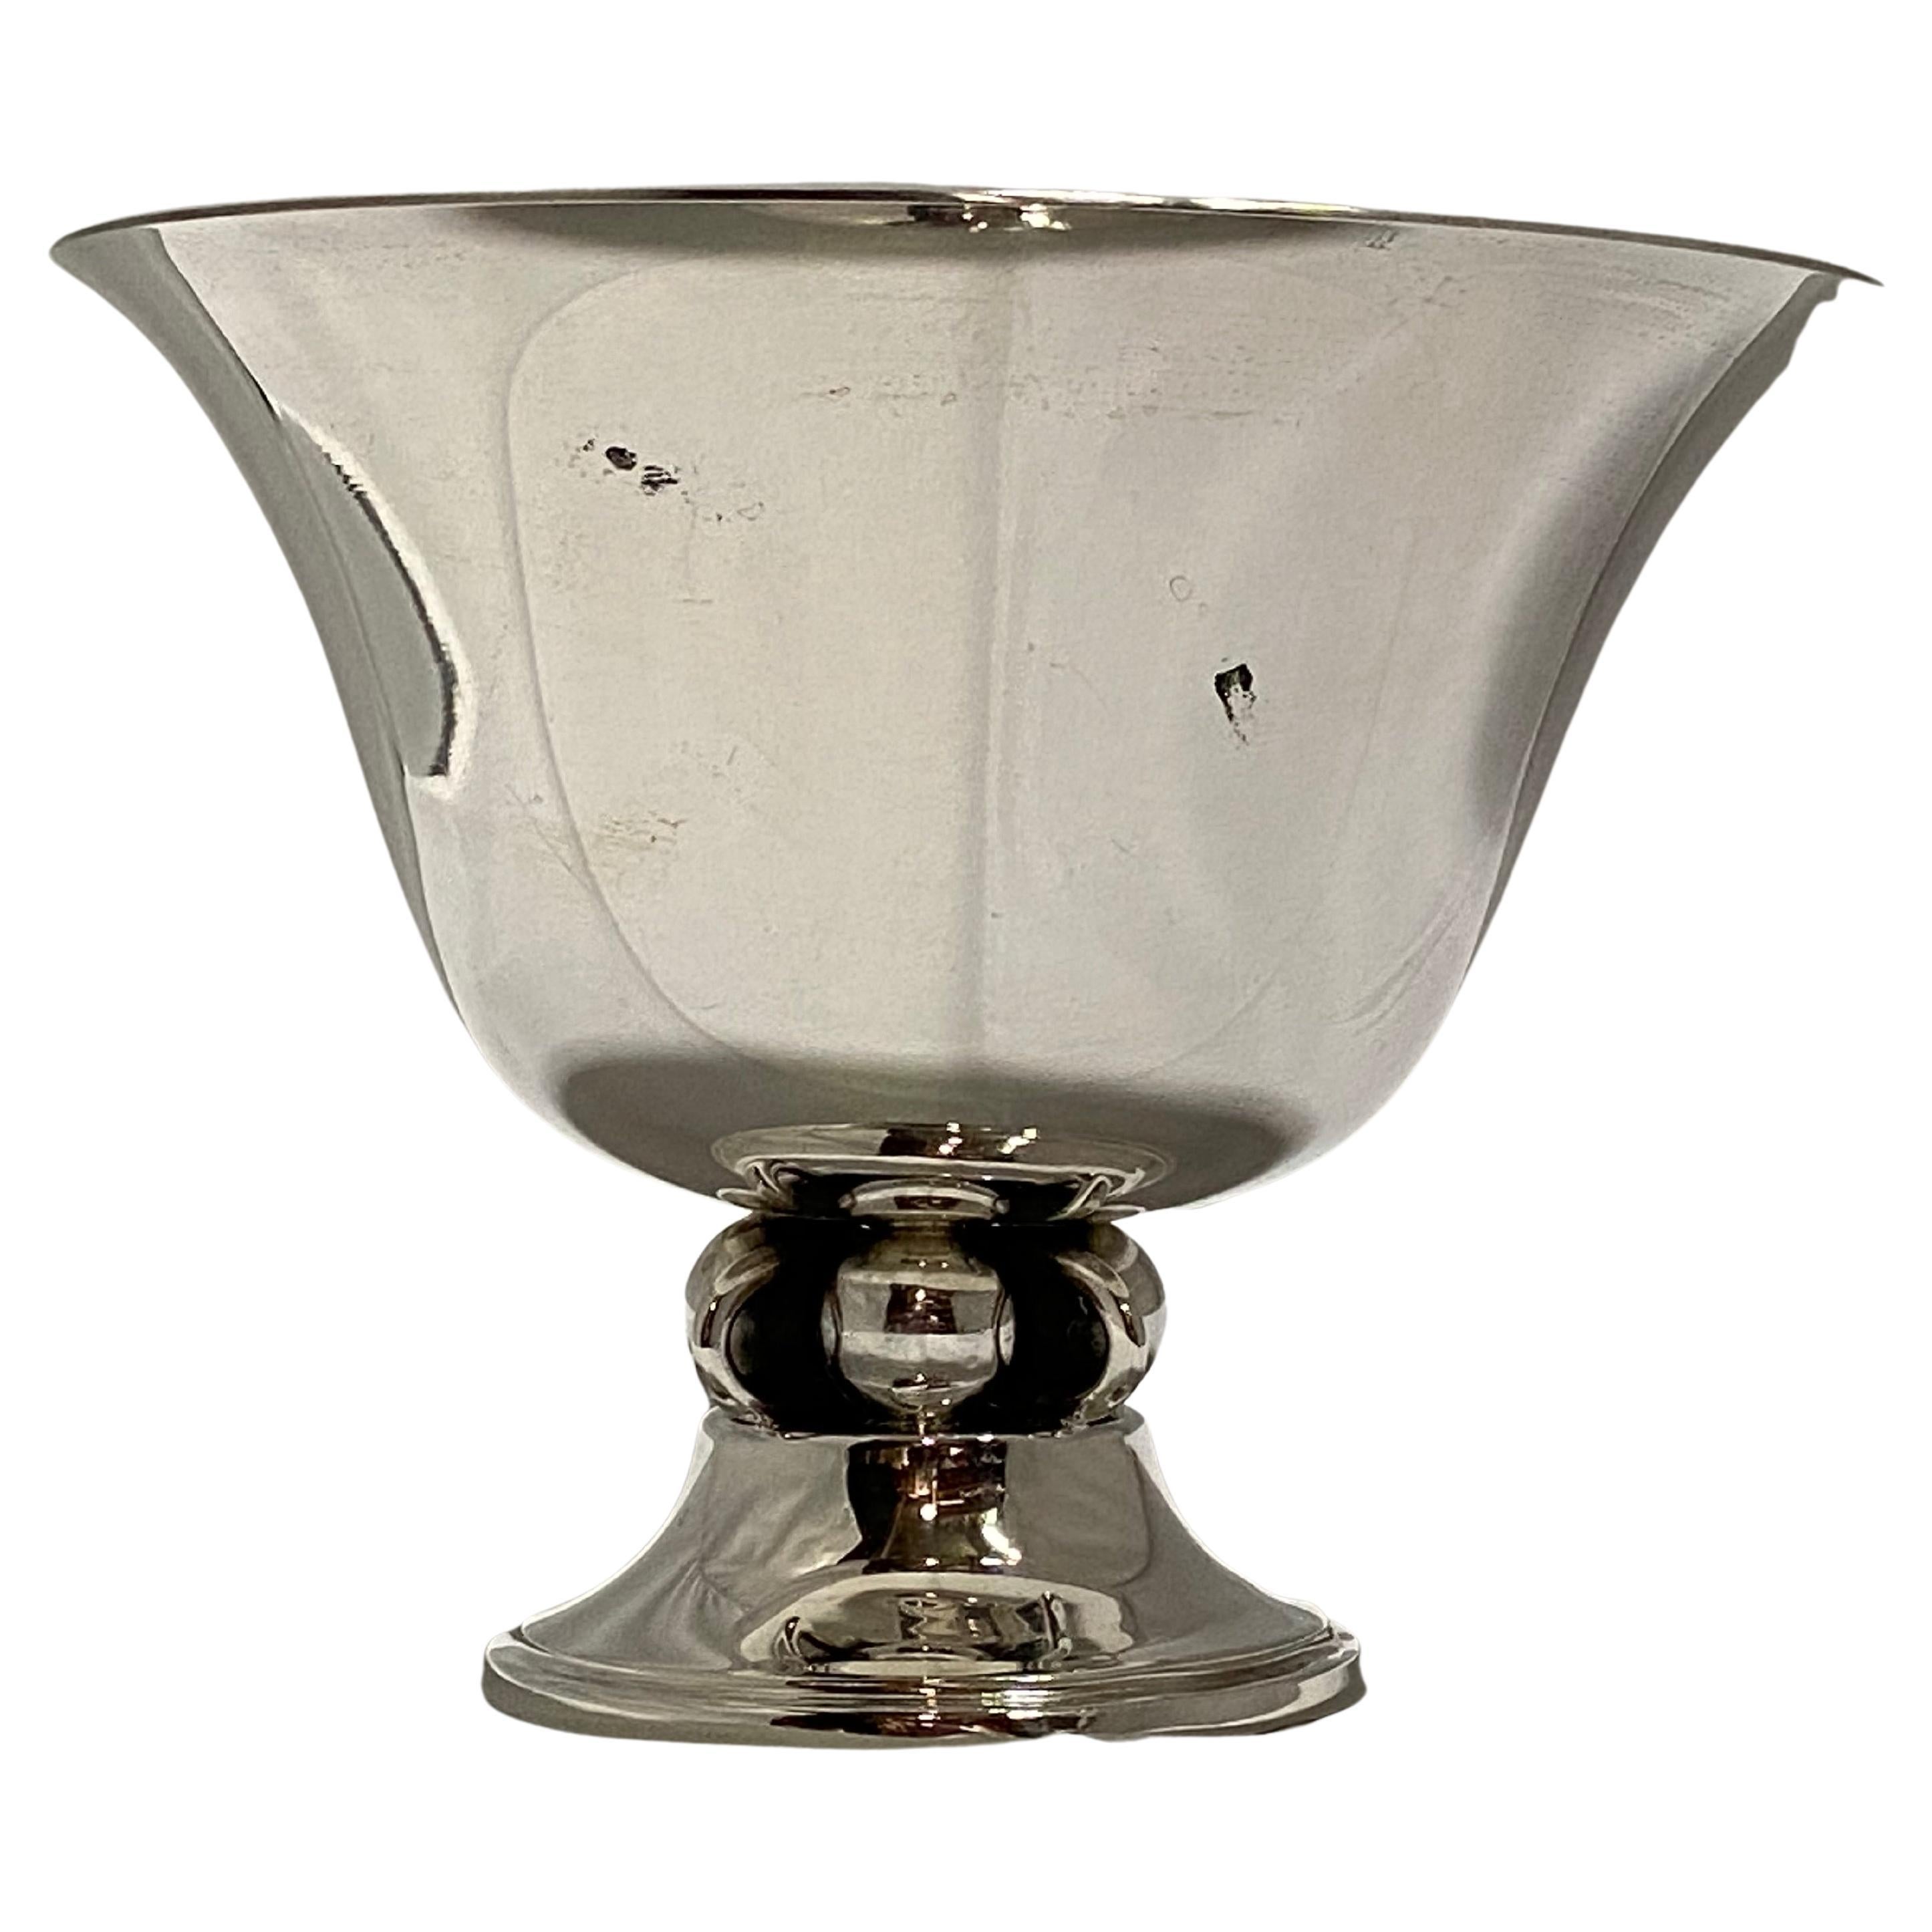 Mid 20th Century Durham Sterling Silver Footed Bowl or Compote For Sale